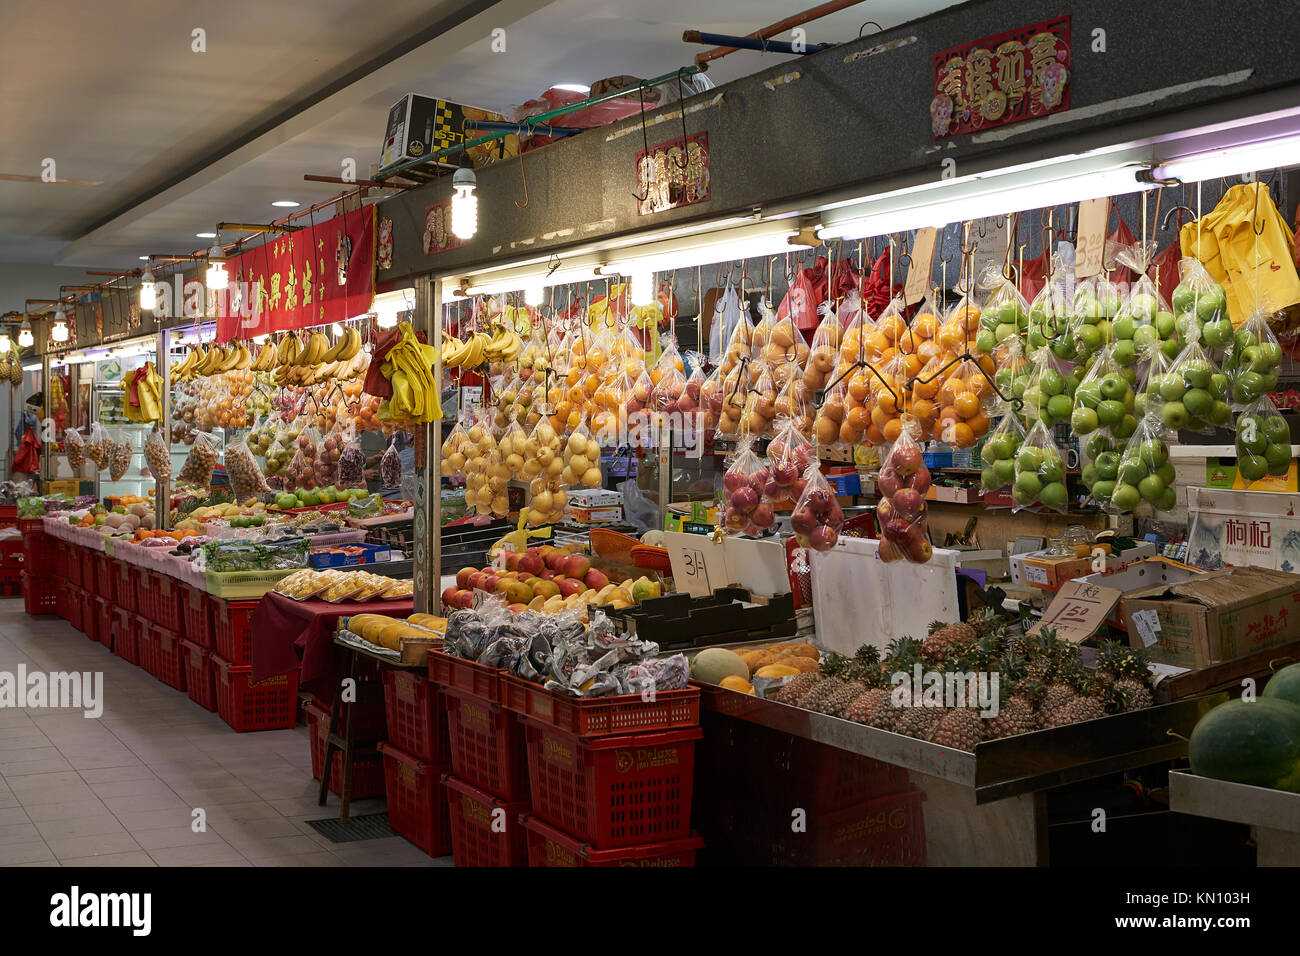 Fruit Market Stall In The Tiong Bahru Market And Food Centre, Tiong Bahru, Singapore. Stock Photo